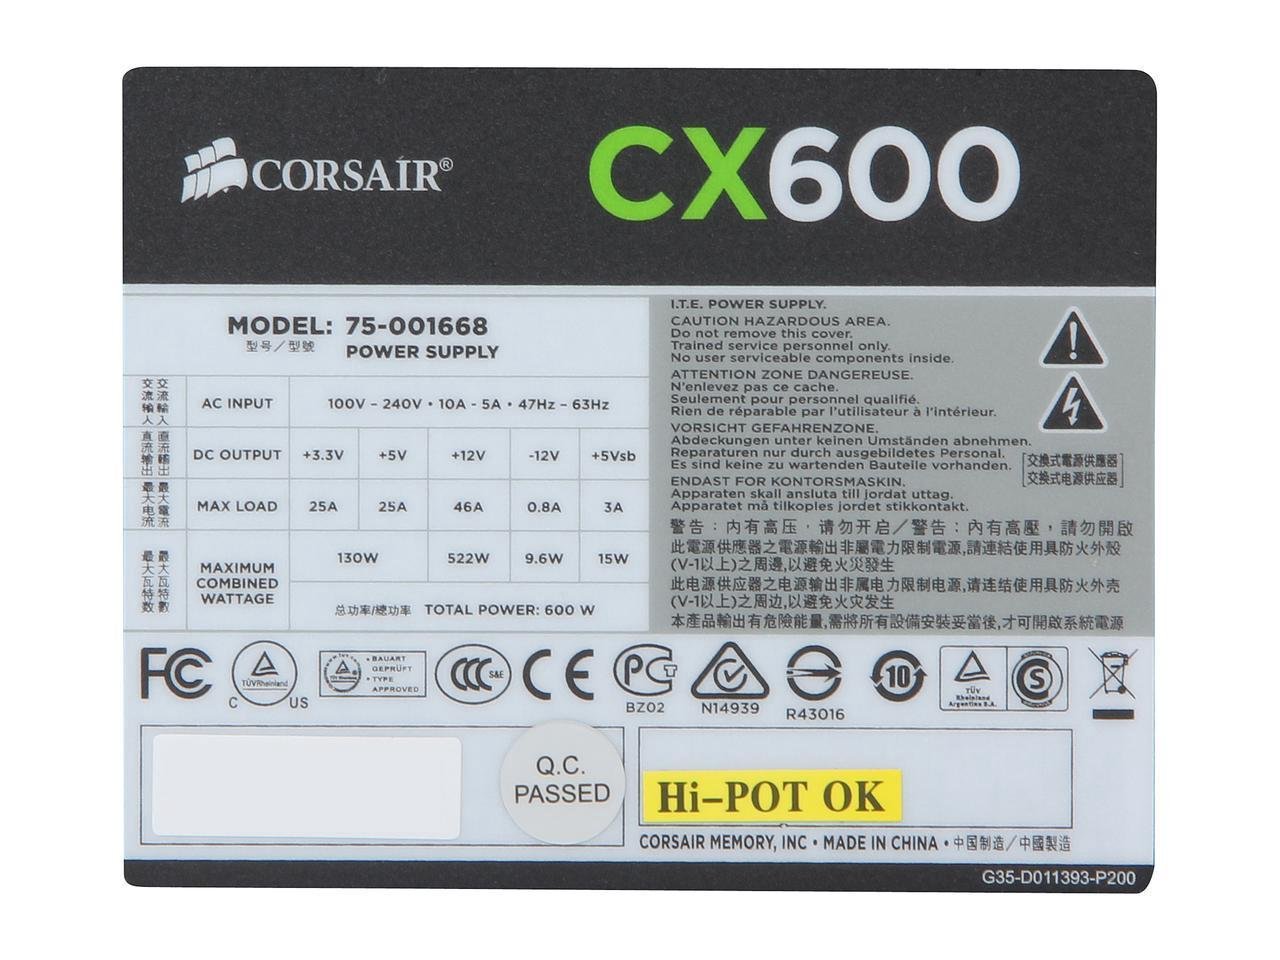 SOLD] Corsair CX600 600W 80 PLUS BRONZE Power Supply $40 OBO - Buy, Sell, Trade -